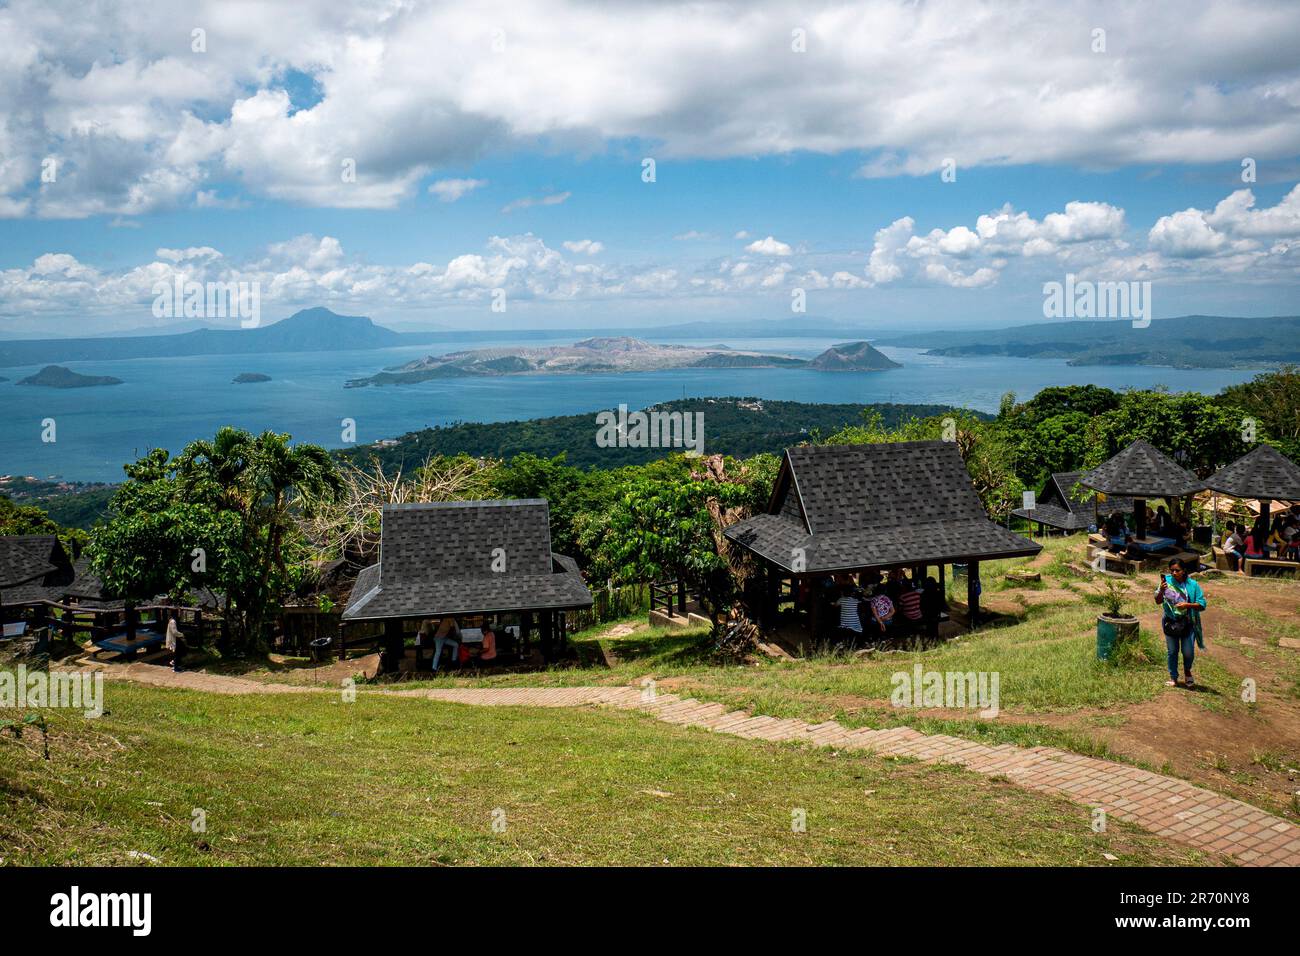 A perfect view of Taal Volcano and the Cottages at the Tagaytay, Picnic Groove. Stock Photo